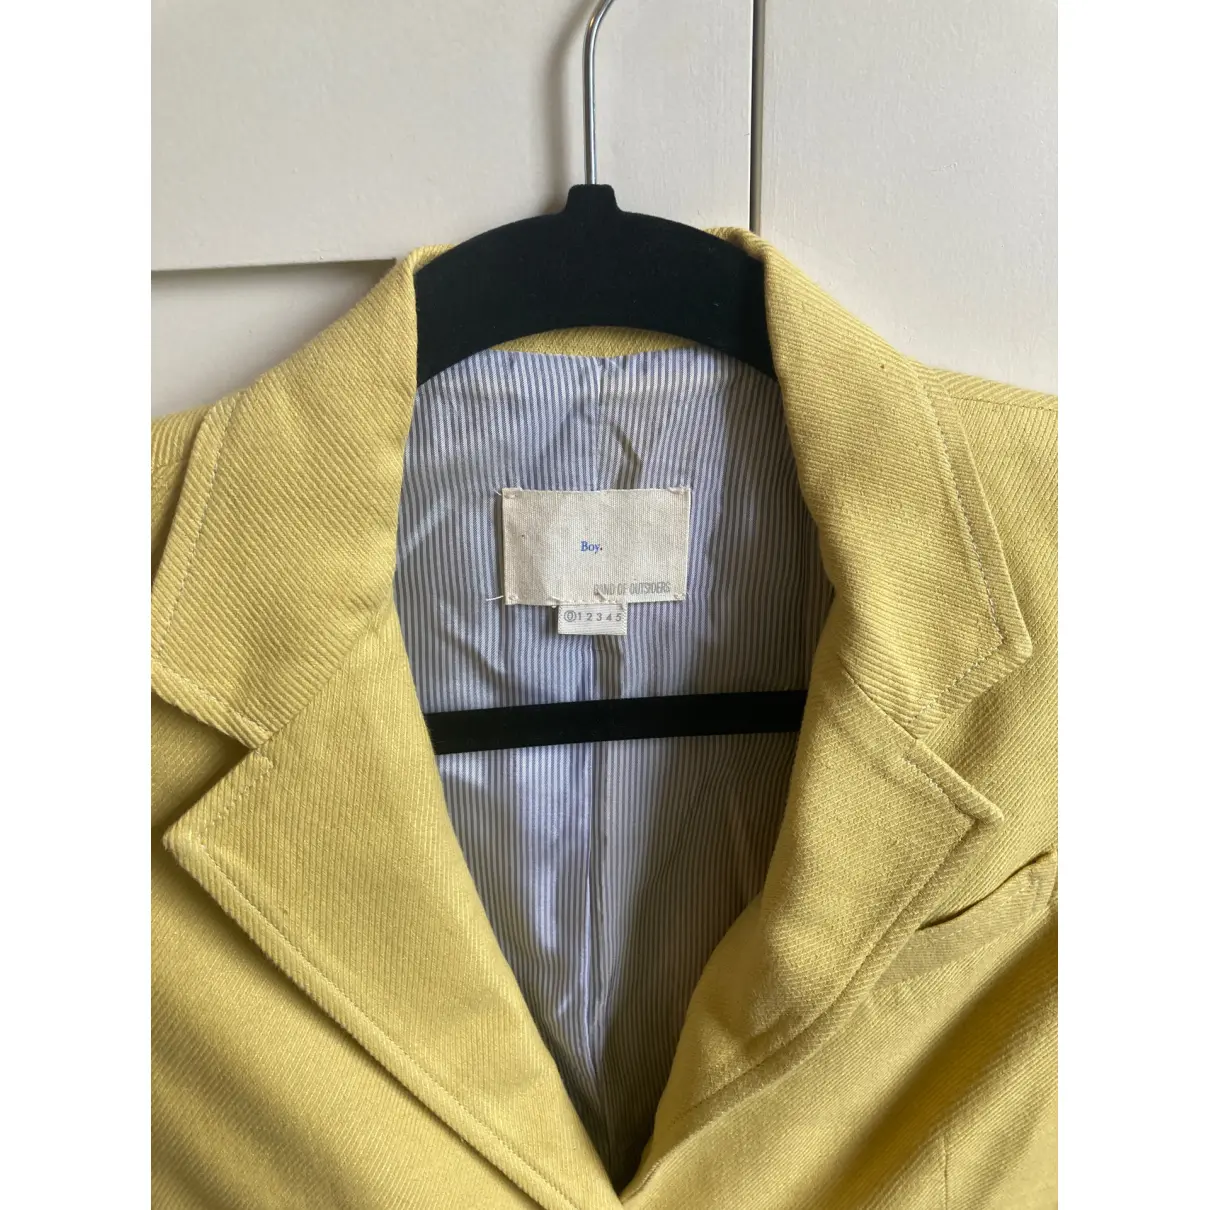 Buy Band Of Outsiders Linen jacket online